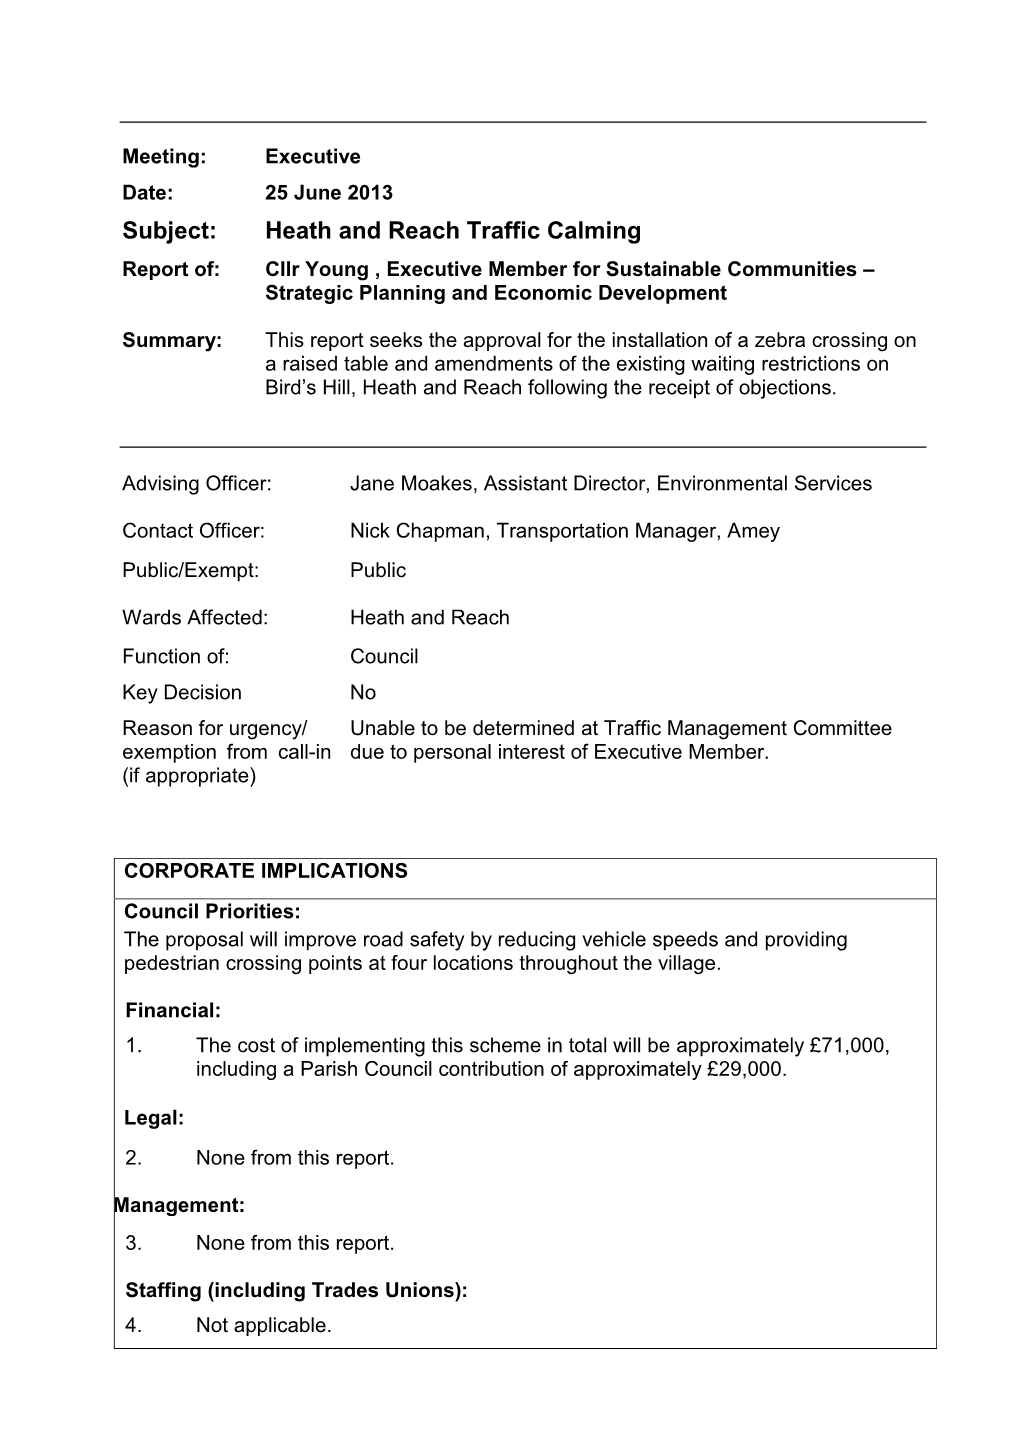 Subject: Heath and Reach Traffic Calming Report Of: Cllr Young , Executive Member for Sustainable Communities – Strategic Planning and Economic Development